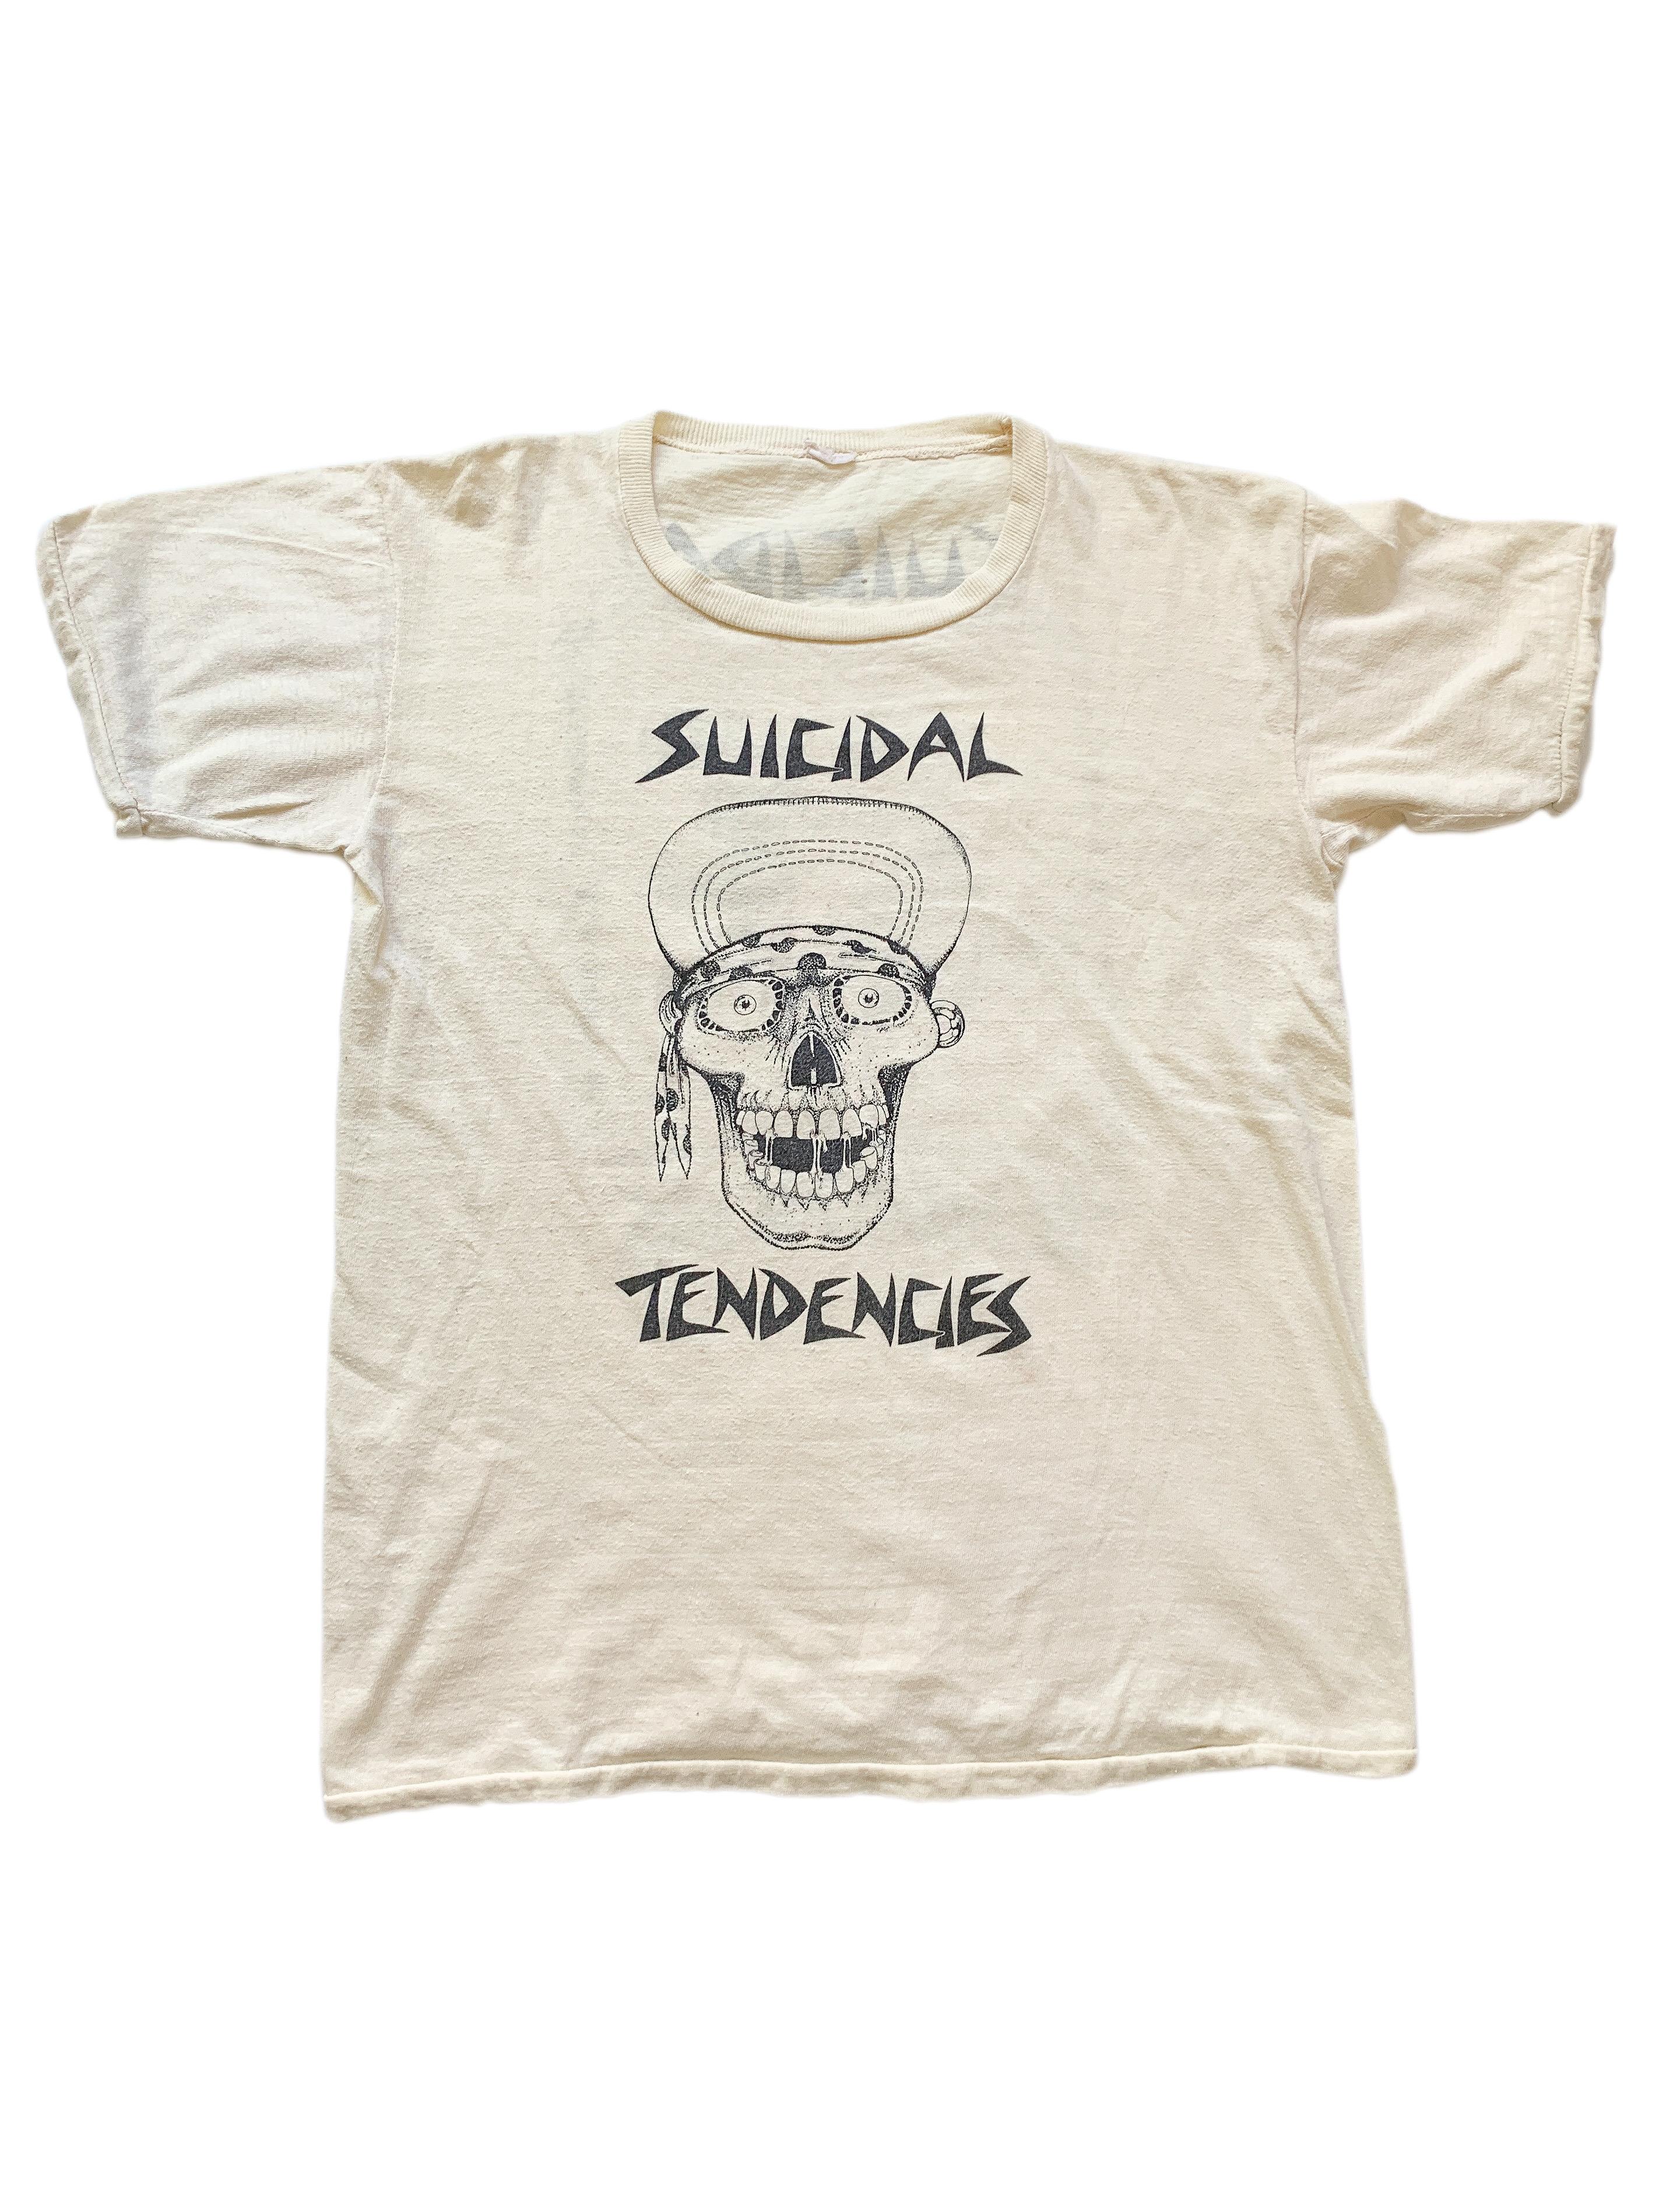 Resurrection Vintage is excited to offer an original vintage Suicidal Tendencies t-shirt featuring the classic Lance Mountain skate graphic from 1983.

Size Small/Medium
Cotton 
1980s
Very Good Original Vintage Condition
Authenticity Guaranteed